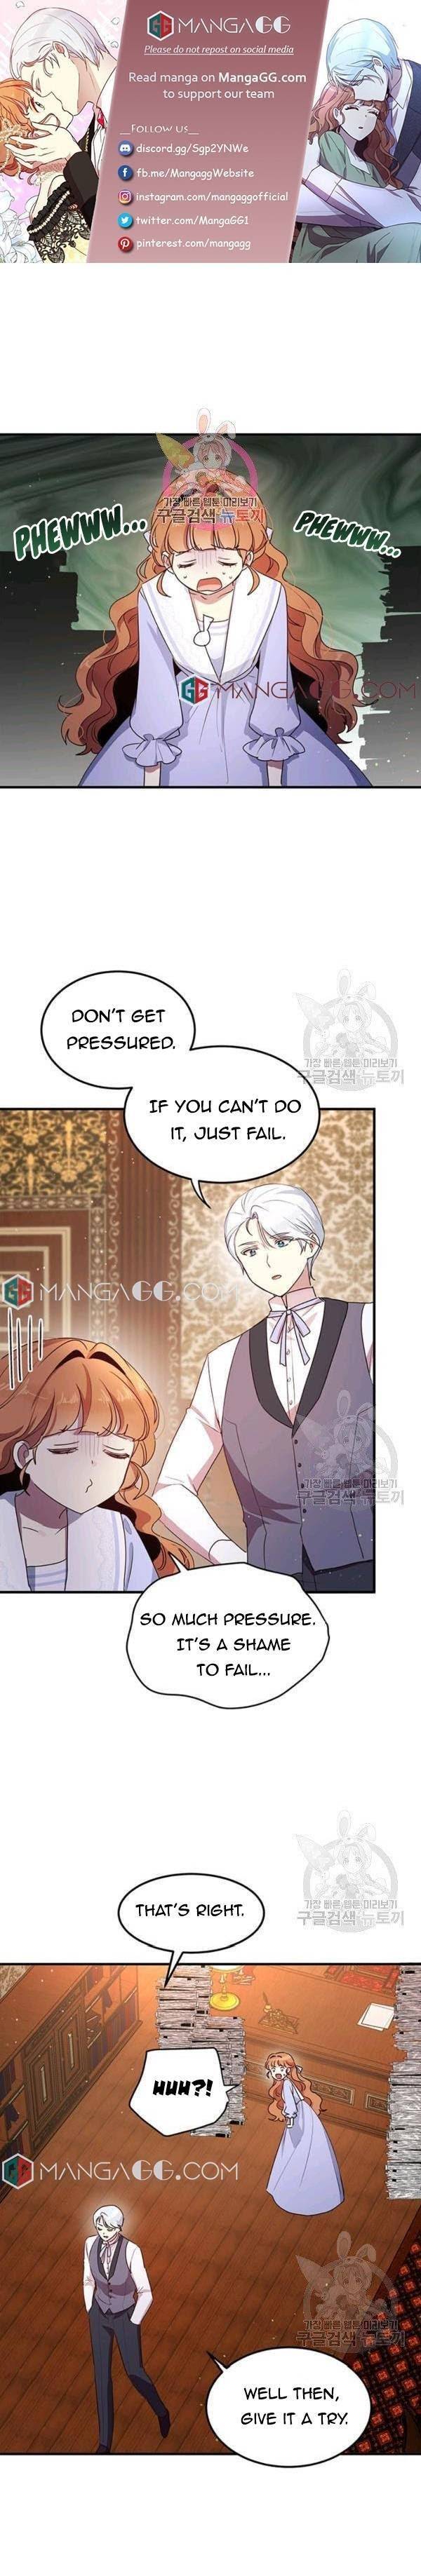 Why Are You Doing This, My Duke!? Webtoon - chapter 102 - #1